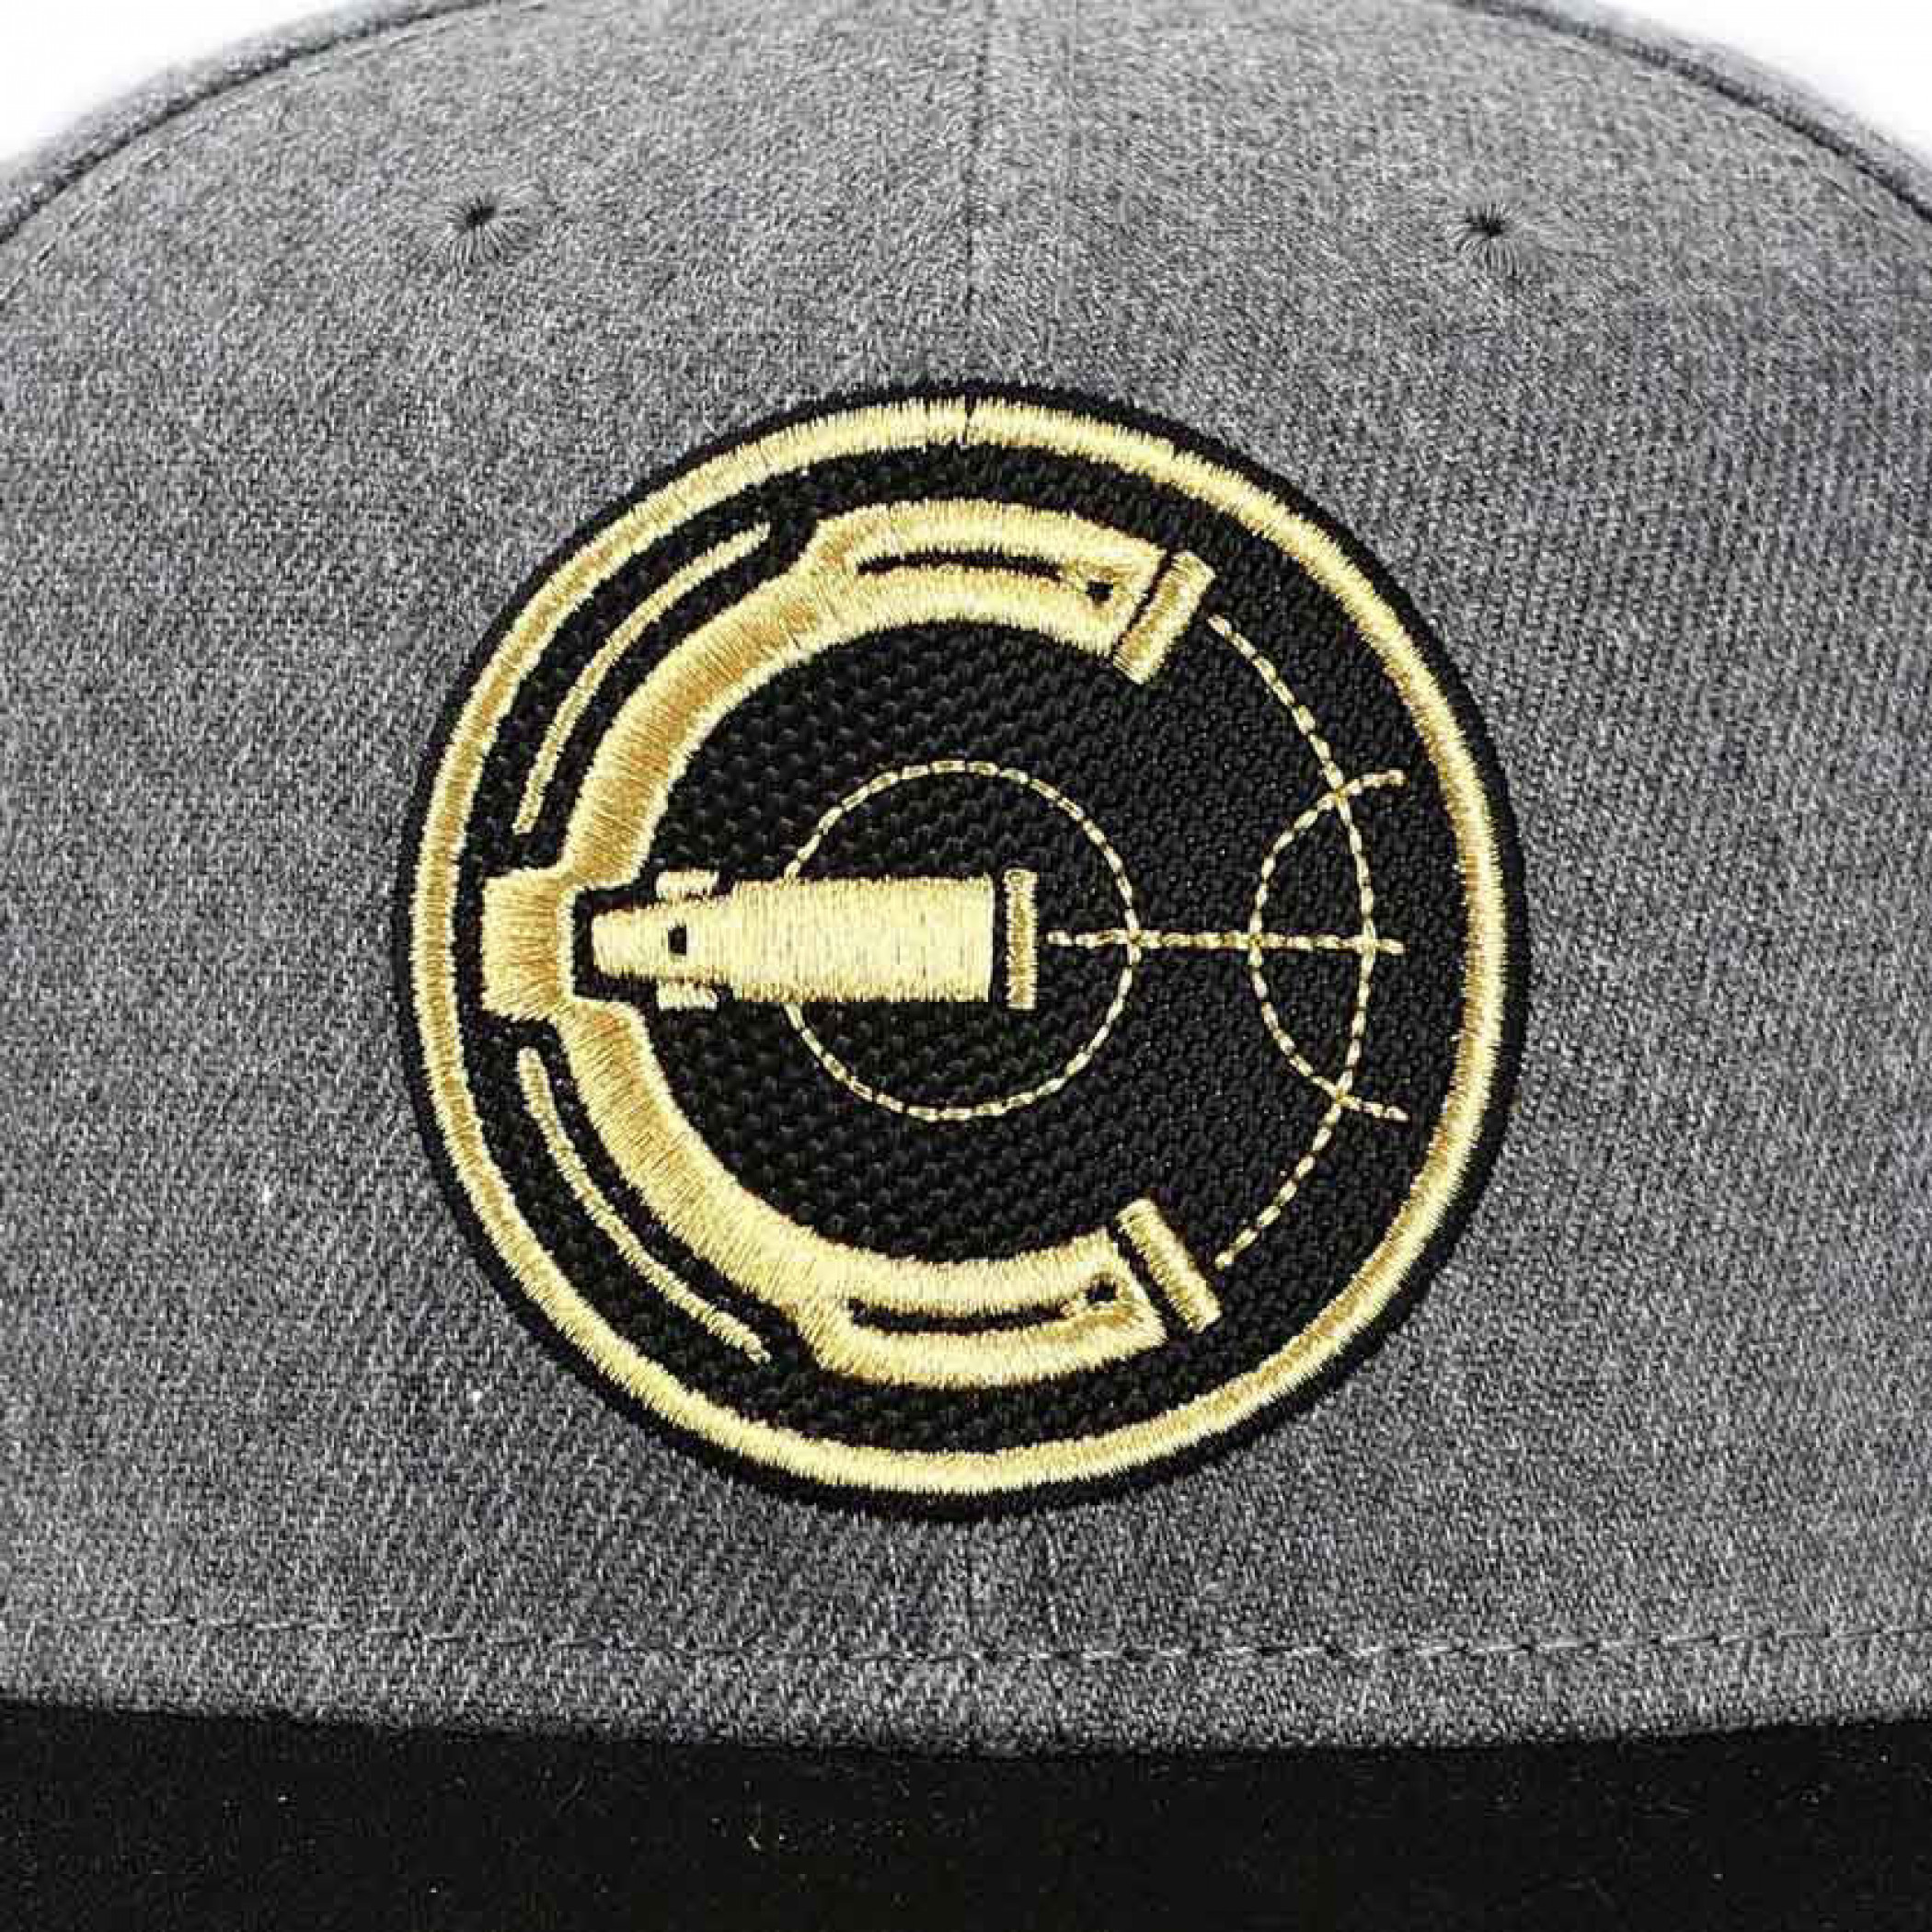 Marvel Comics The Eternals Logo Embroidered Pre-Curved Snapback Hat